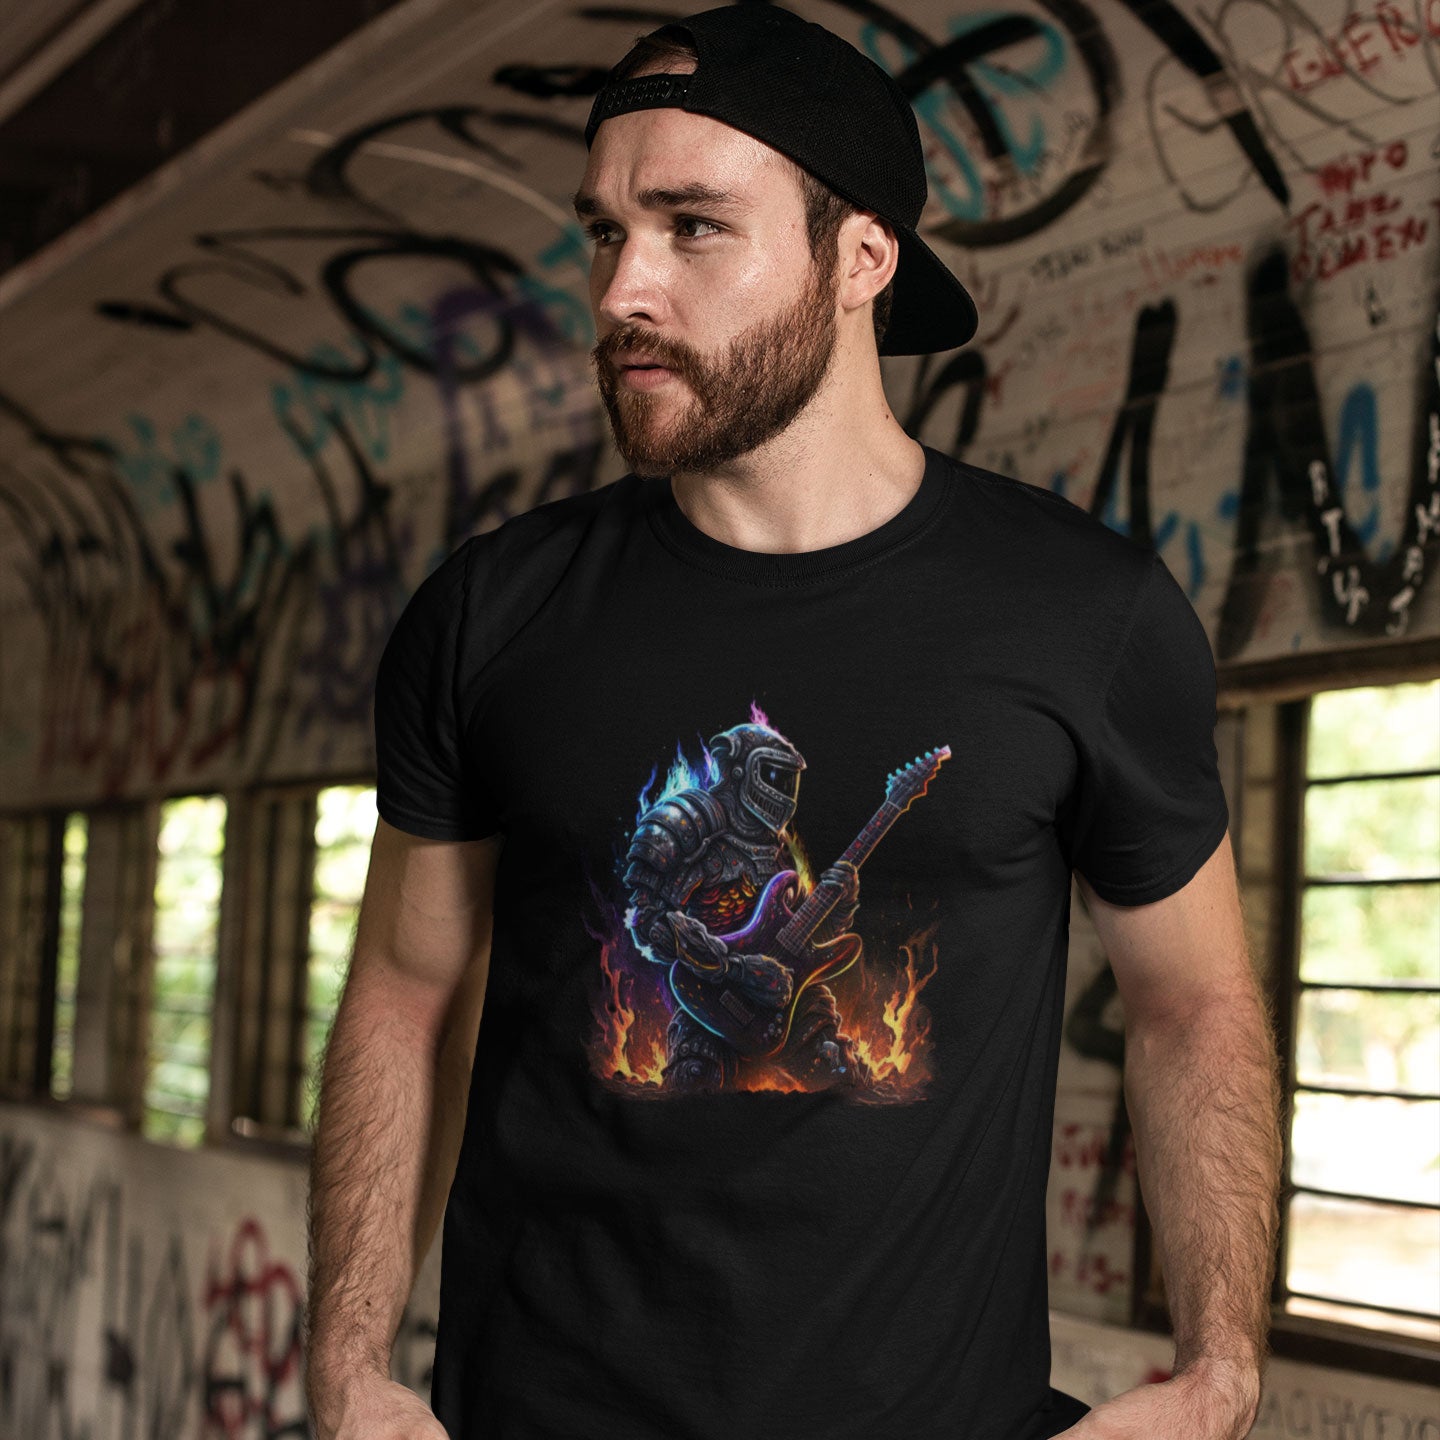 Guy wearing black t-shirt with Space Robot on fire playing the guitar